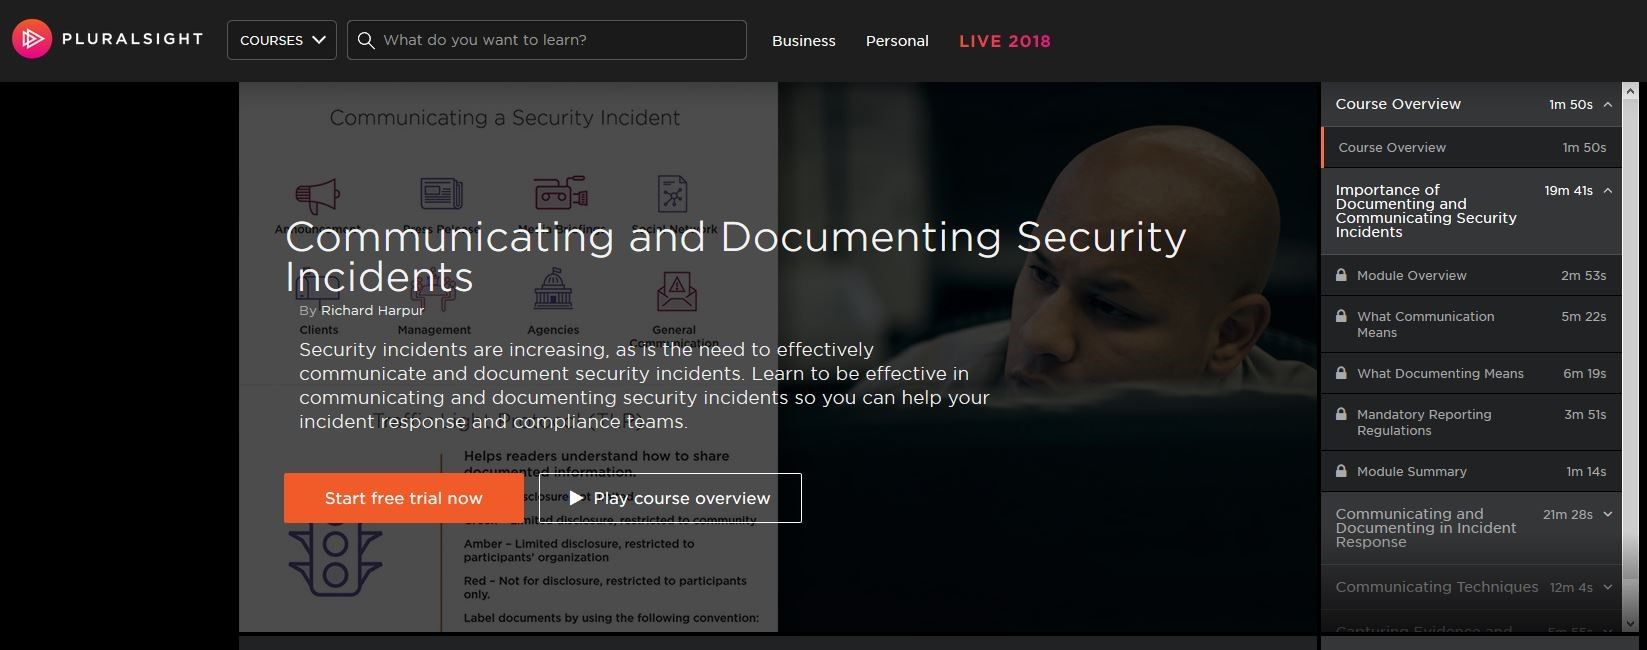 New Pluralsight Course: Communicating and Documenting Security Incidents